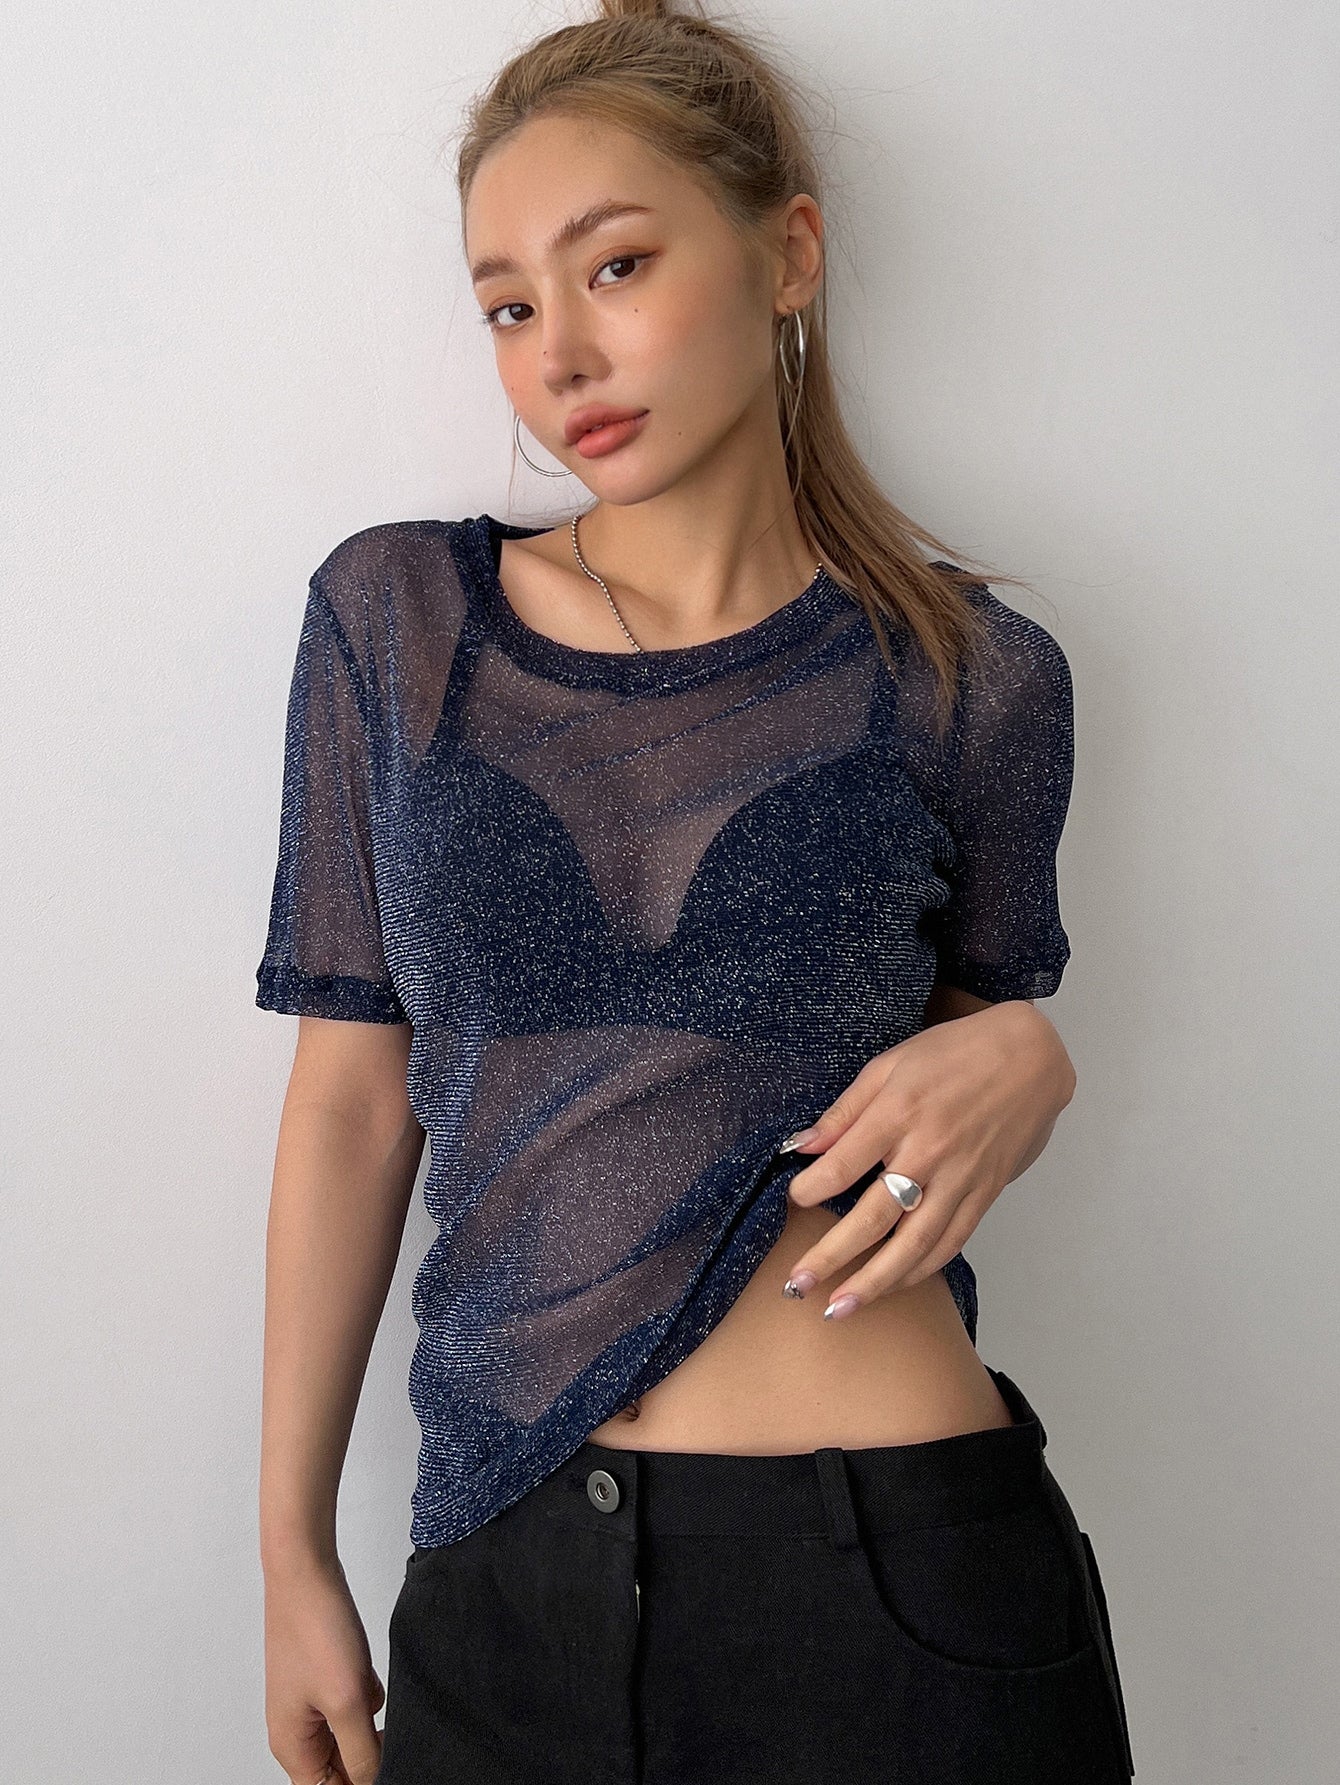 Solid Sheer Mesh Top Without Bra